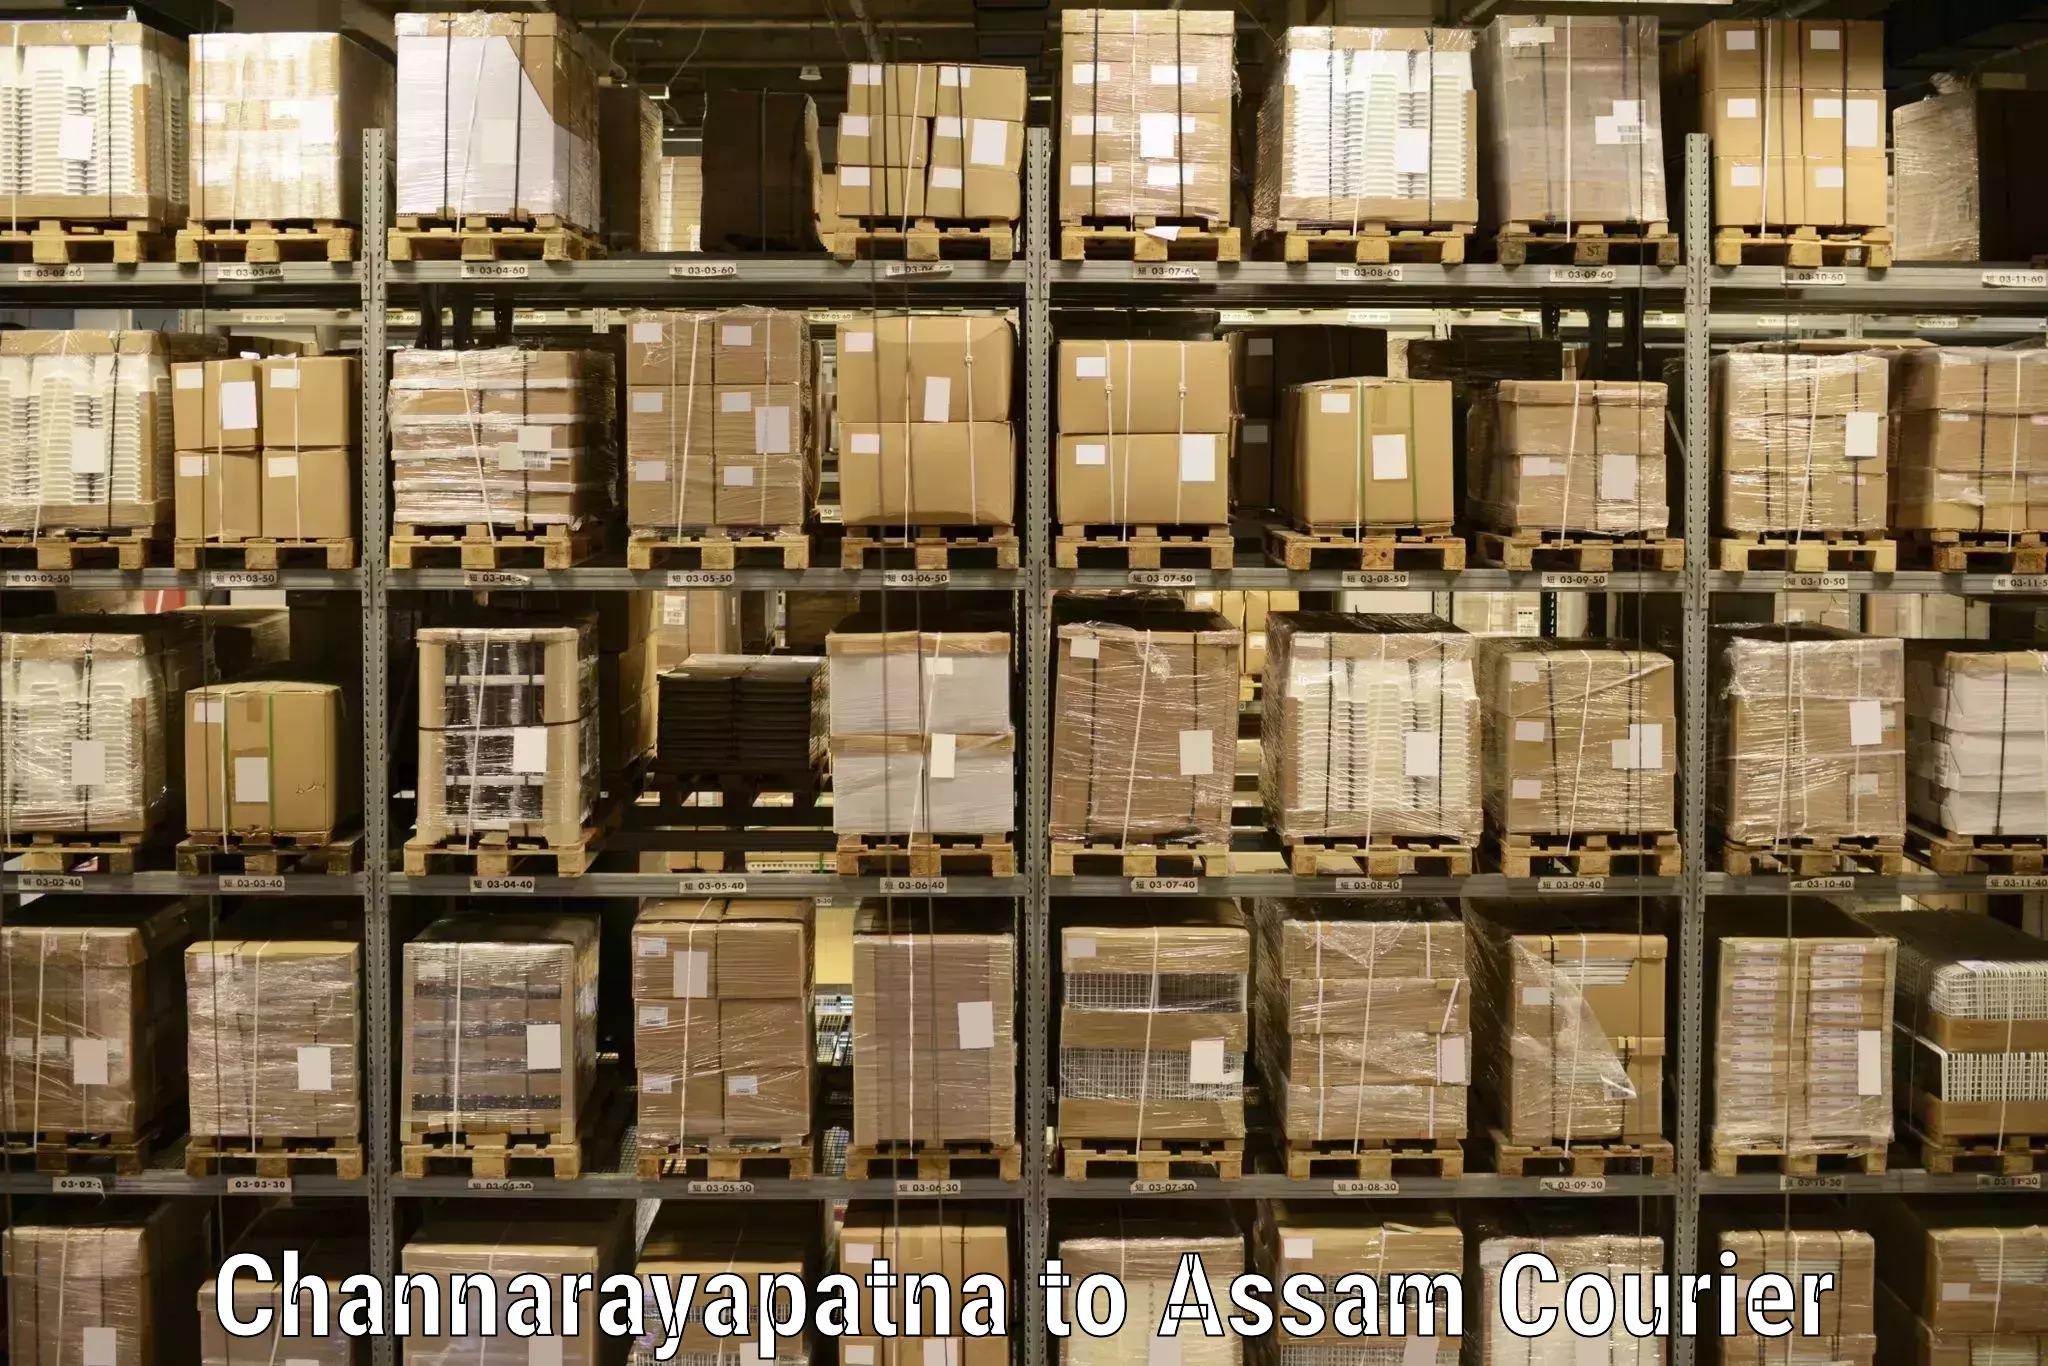 Expedited parcel delivery Channarayapatna to Assam